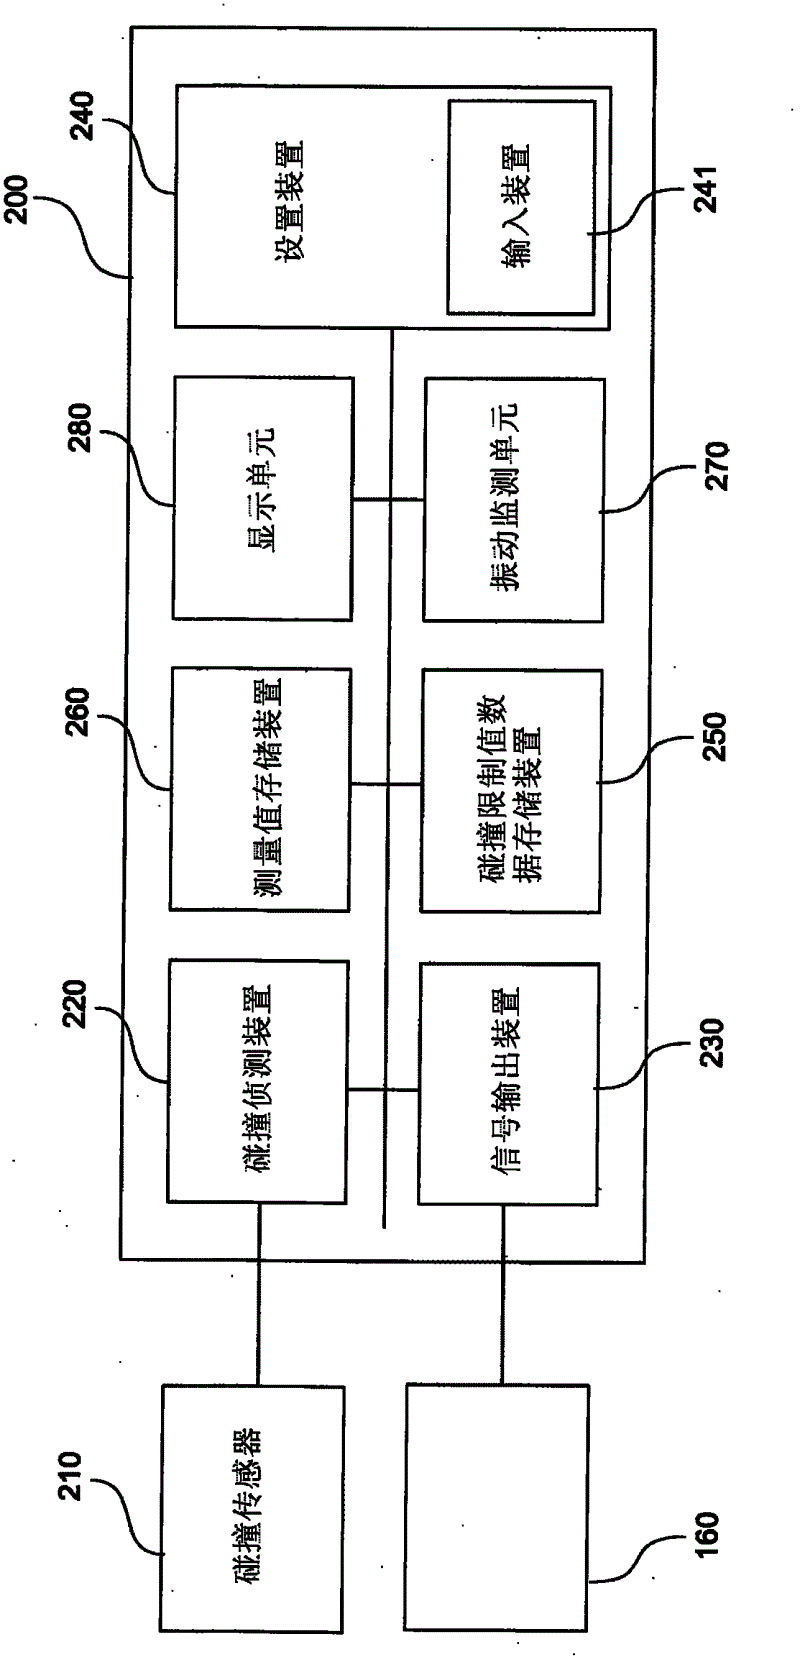 Machine tool comprising a device for collision monitoring